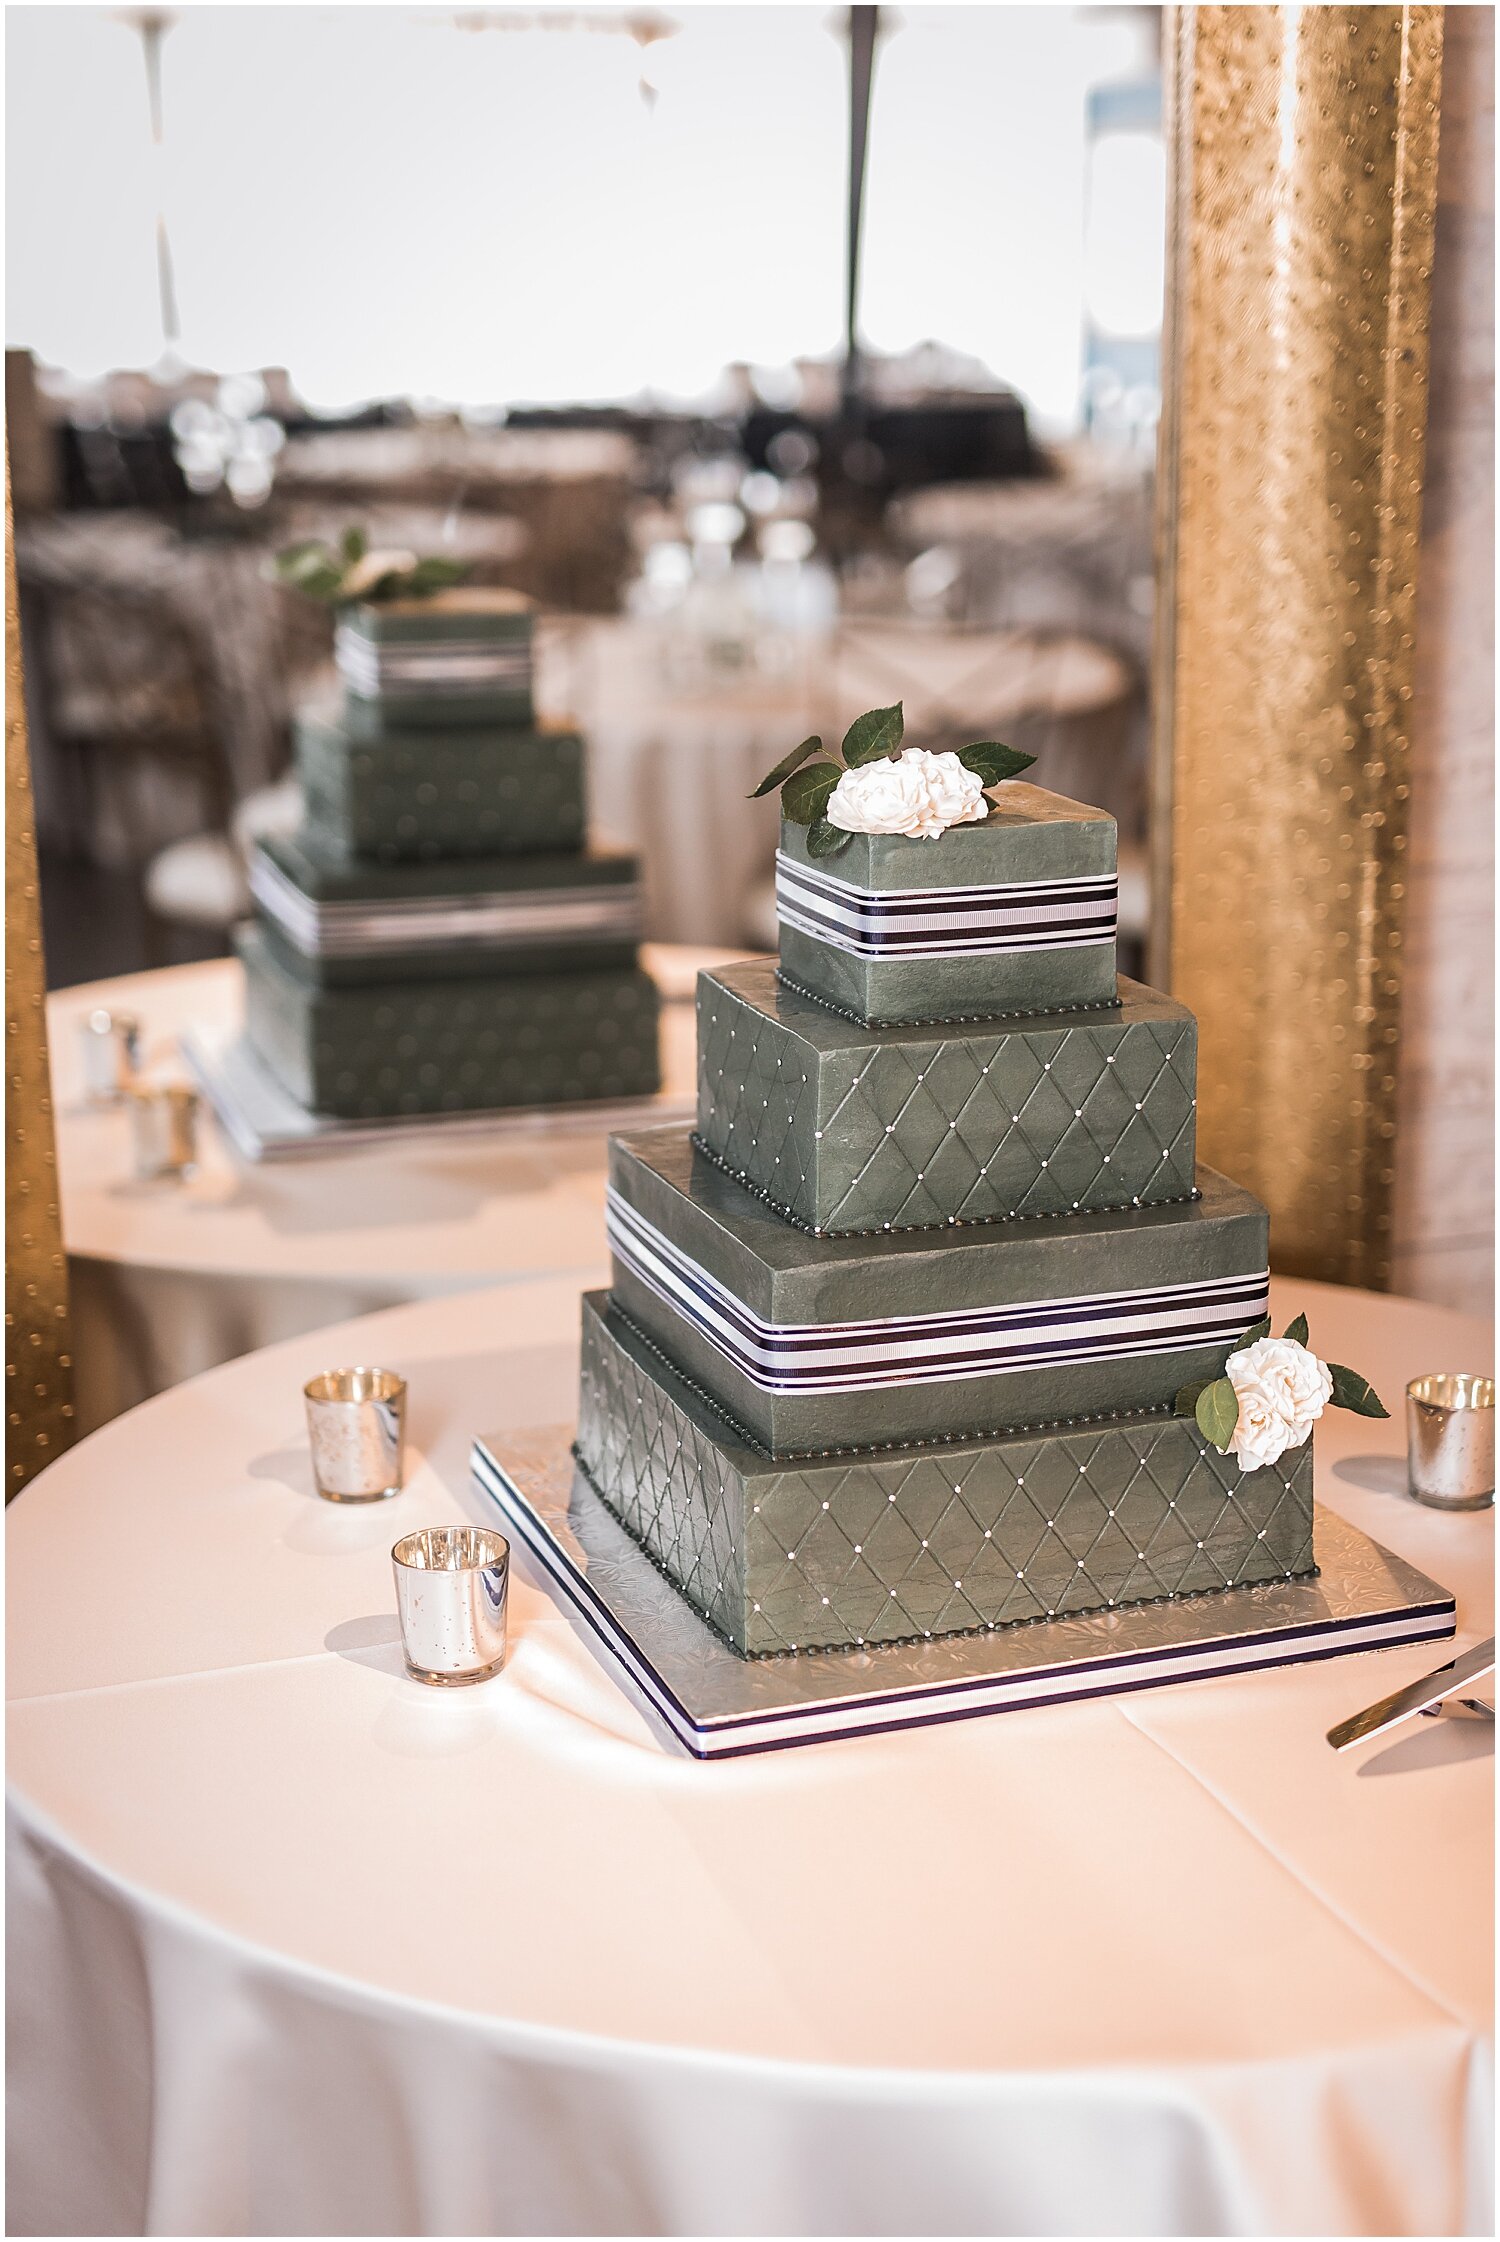  wedding cake for the grooms 